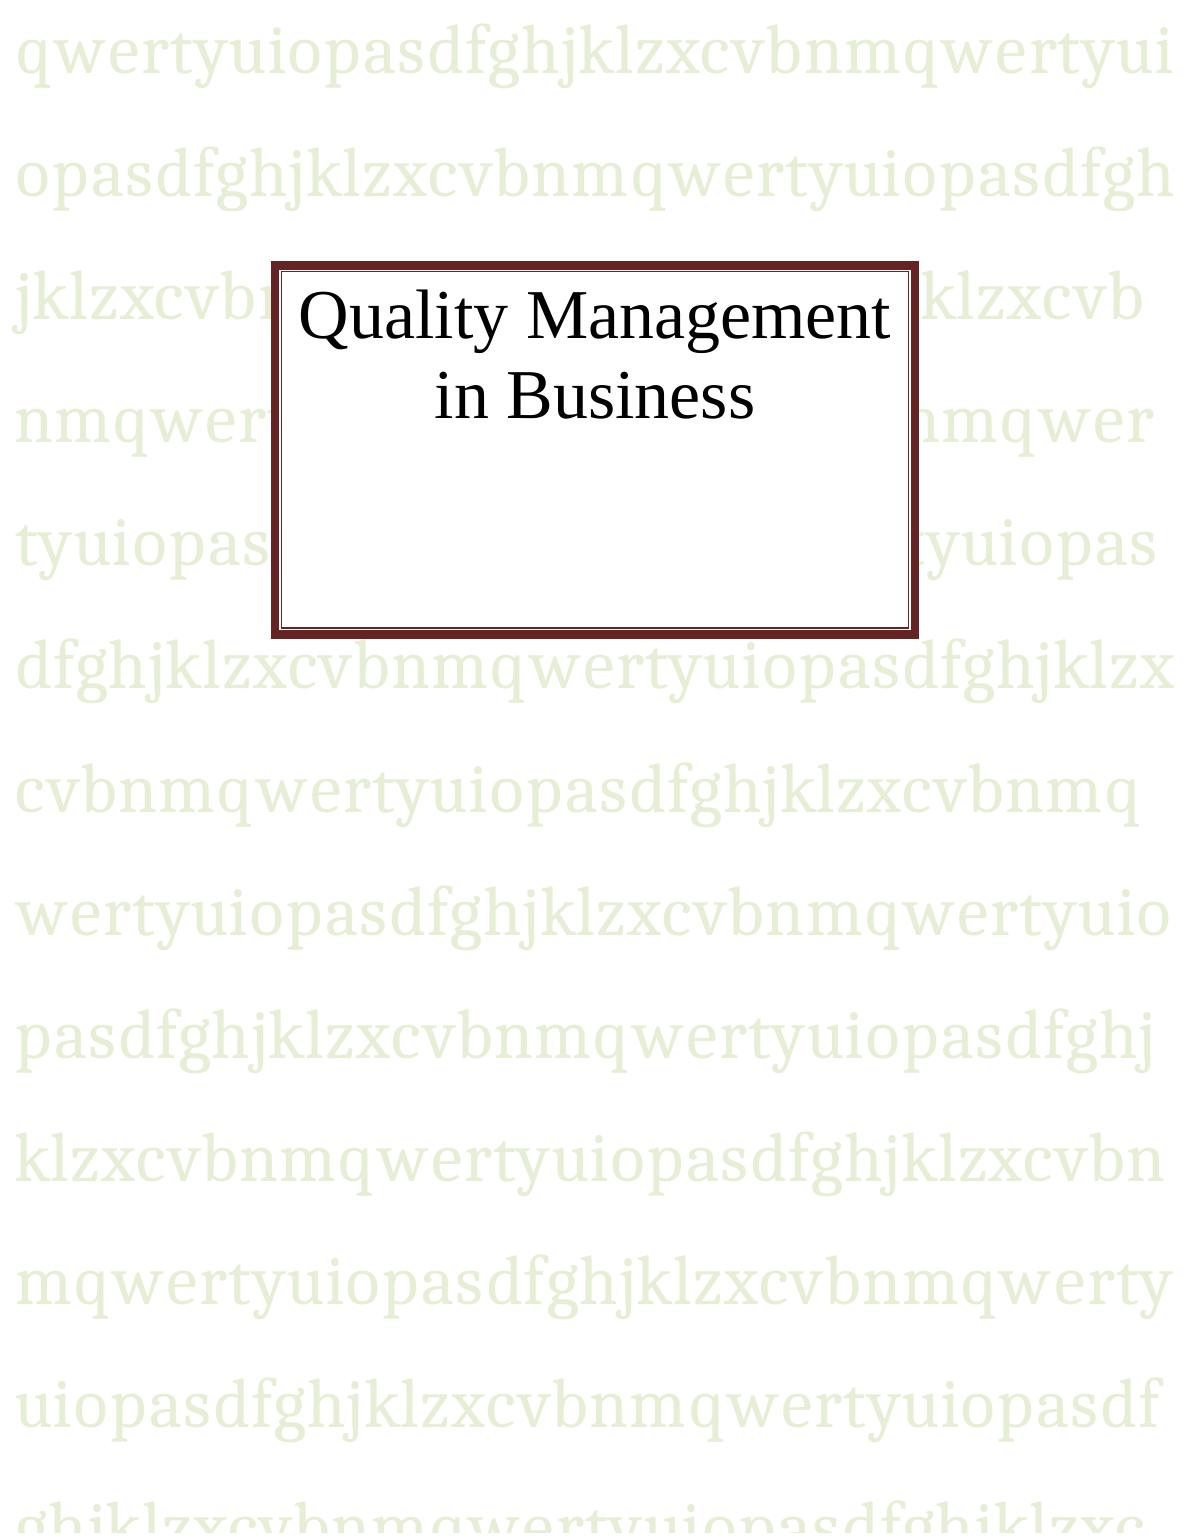 Quality Management in Business_1